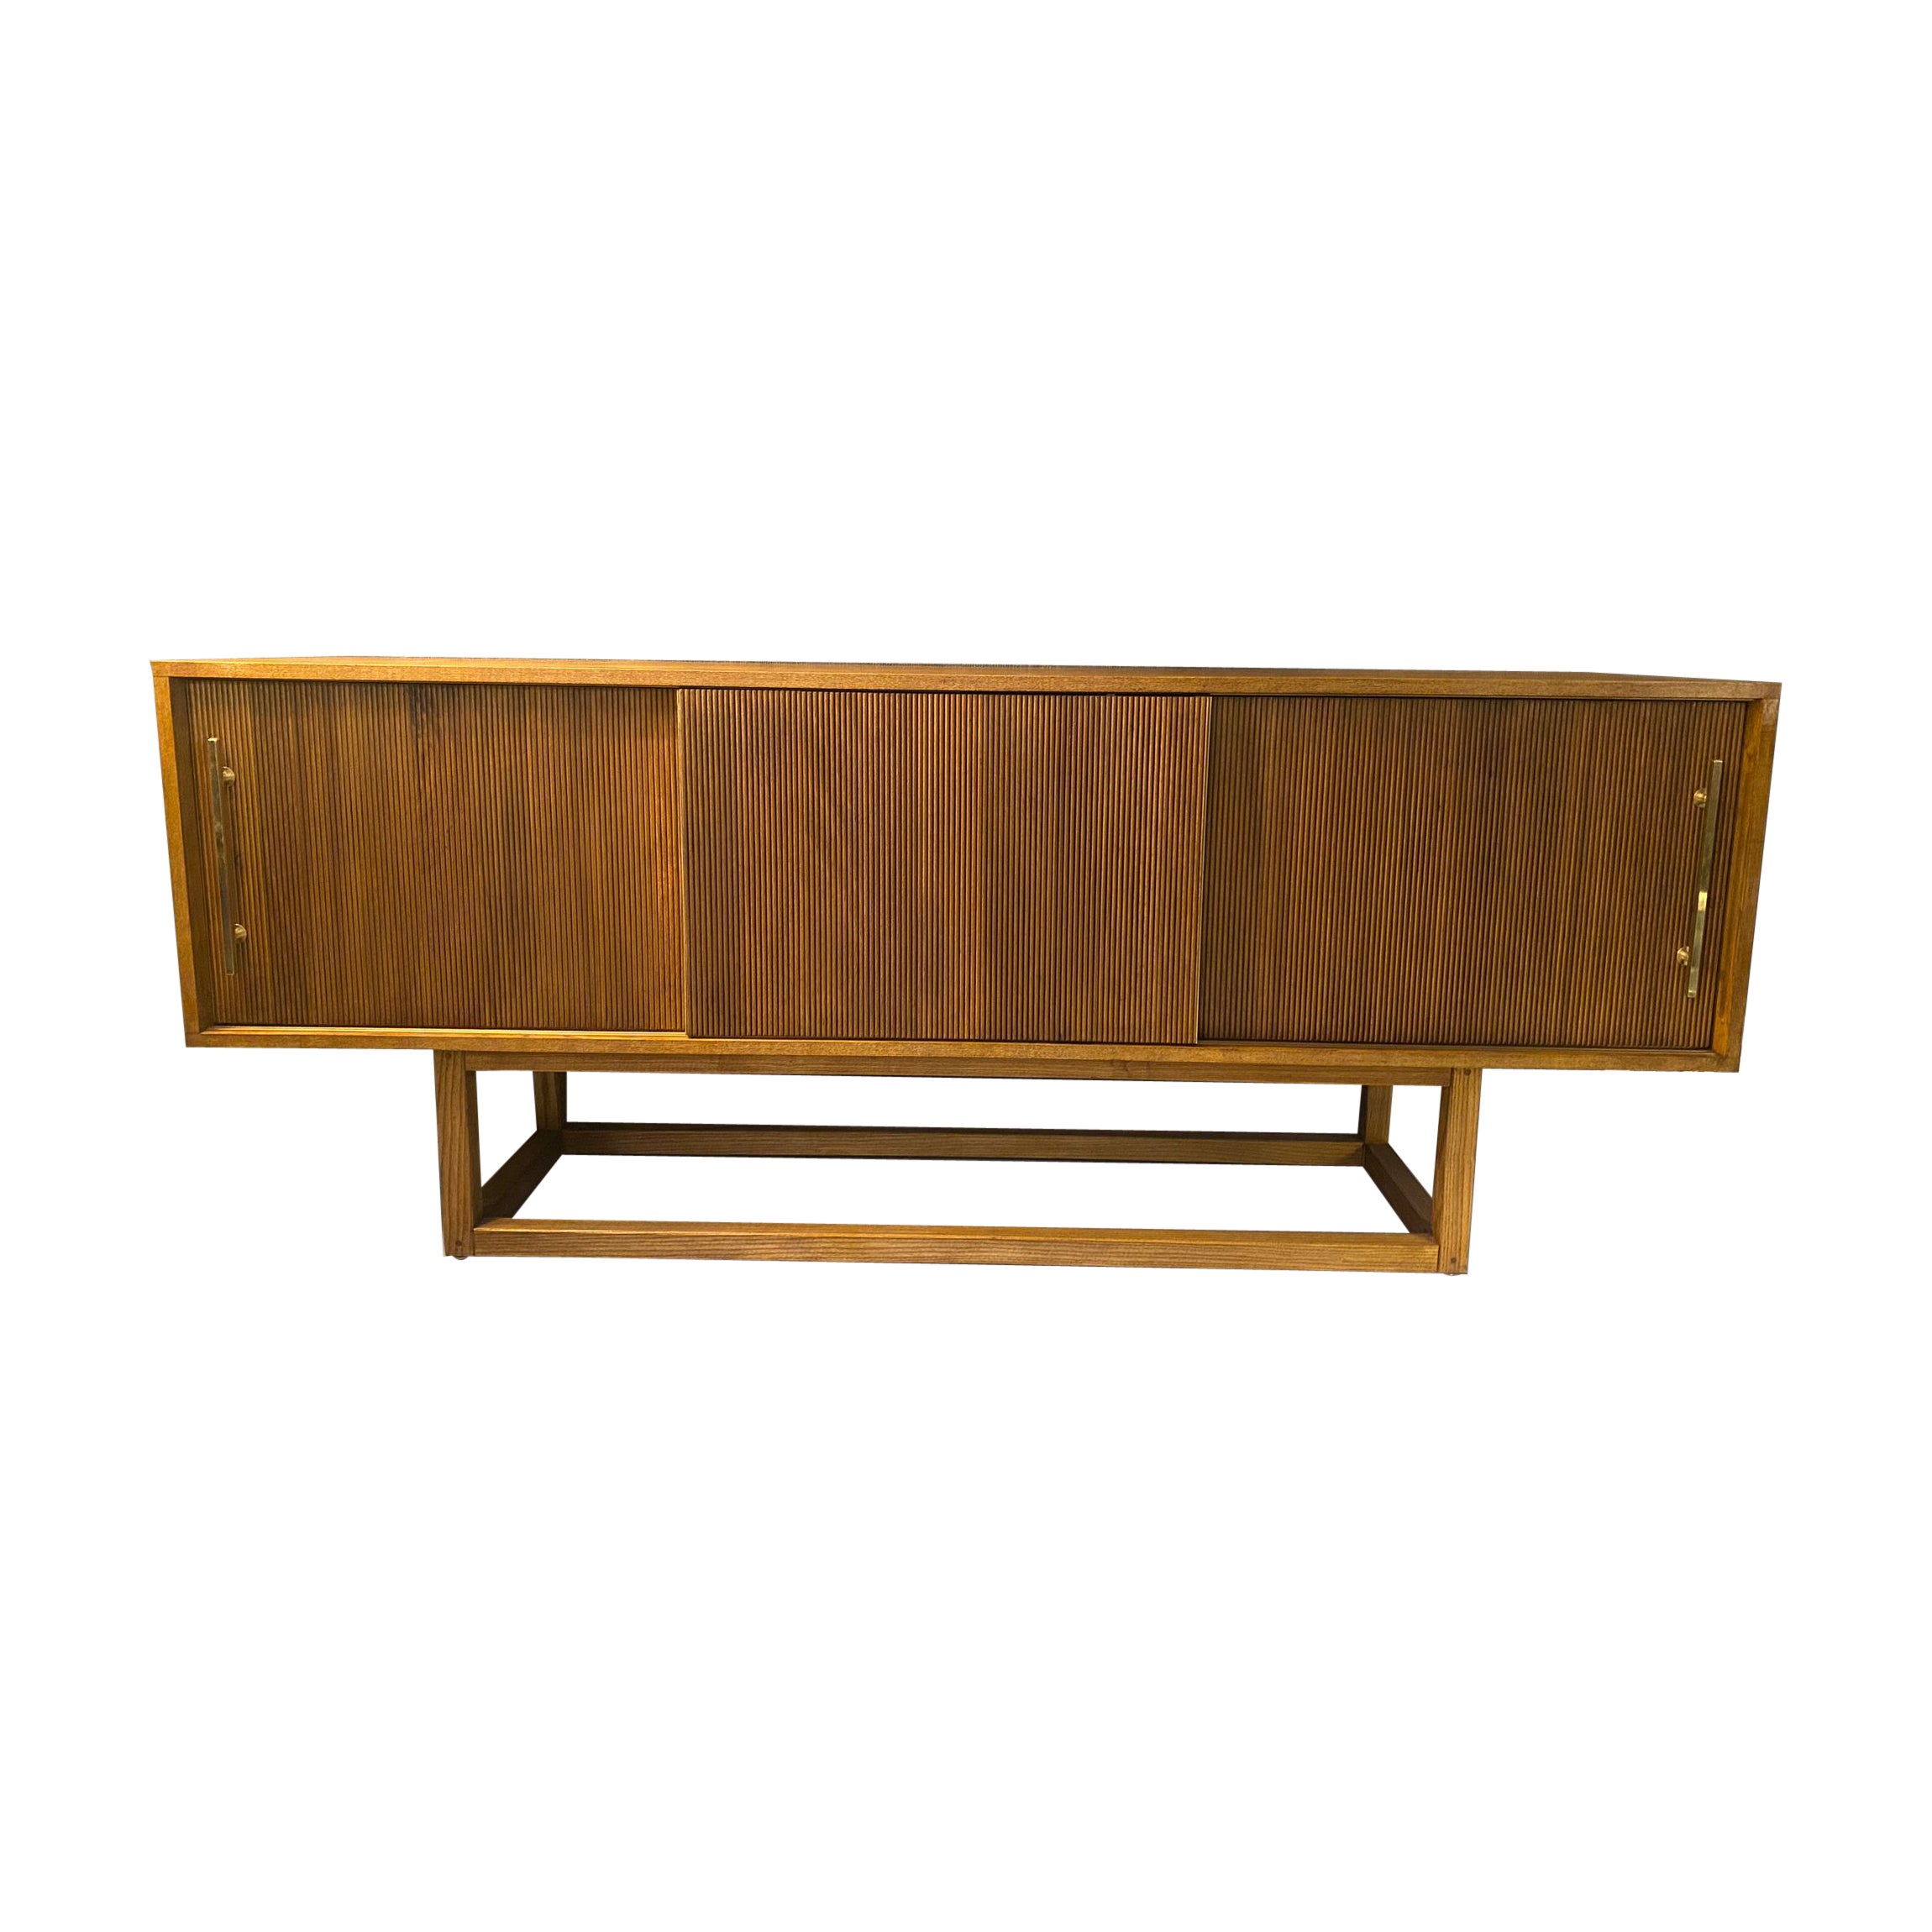 Italian Contemporary  Geometric Wood Sideboard with Brass Finishes